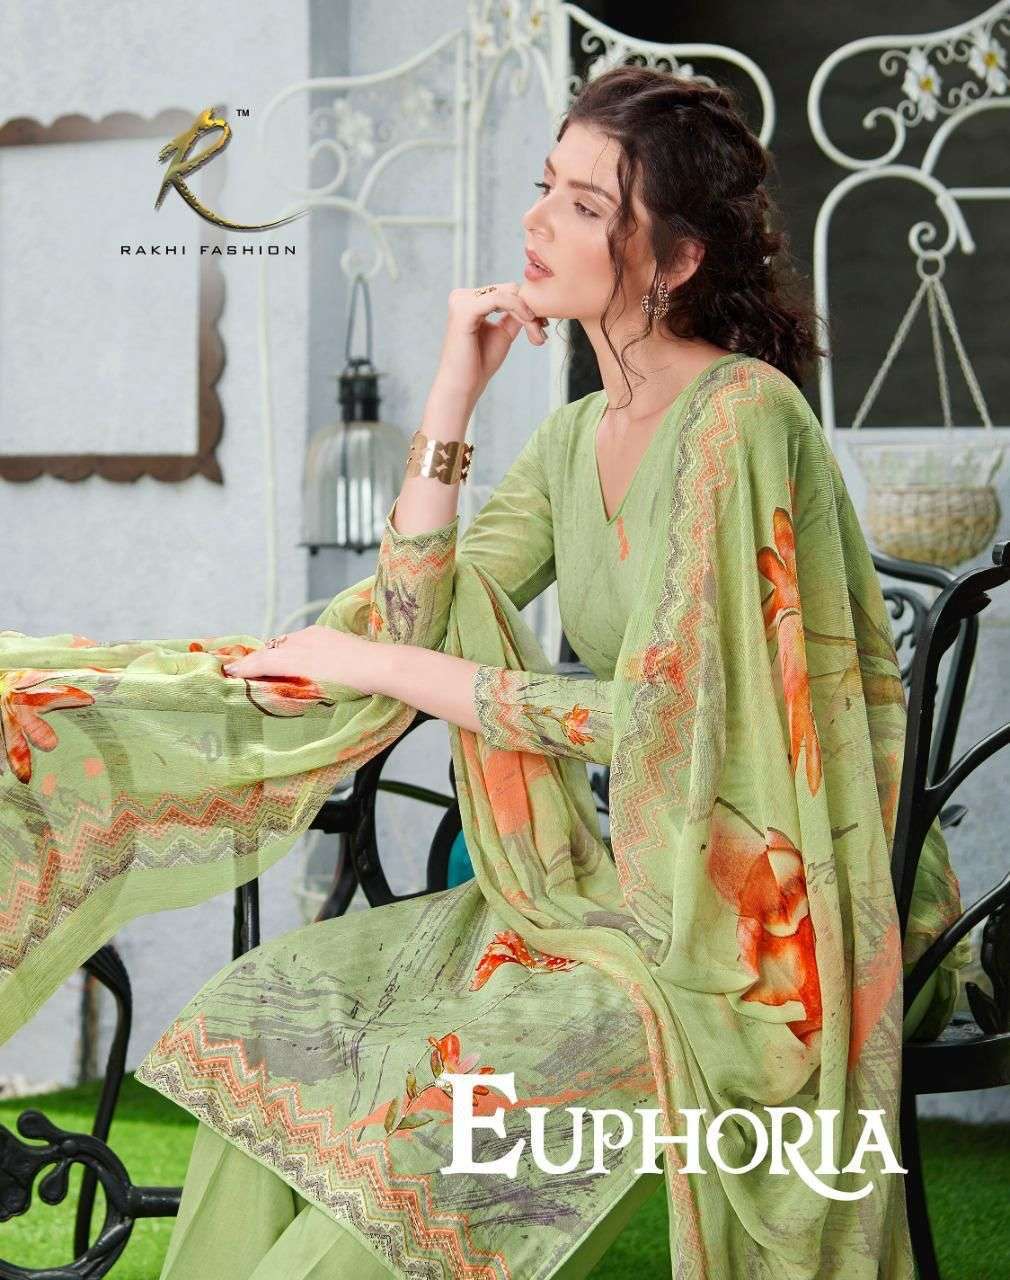 Buy Daily Wear Green Hand Work Glace Cotton Churidar Suit Online From Surat  Wholesale Shop.